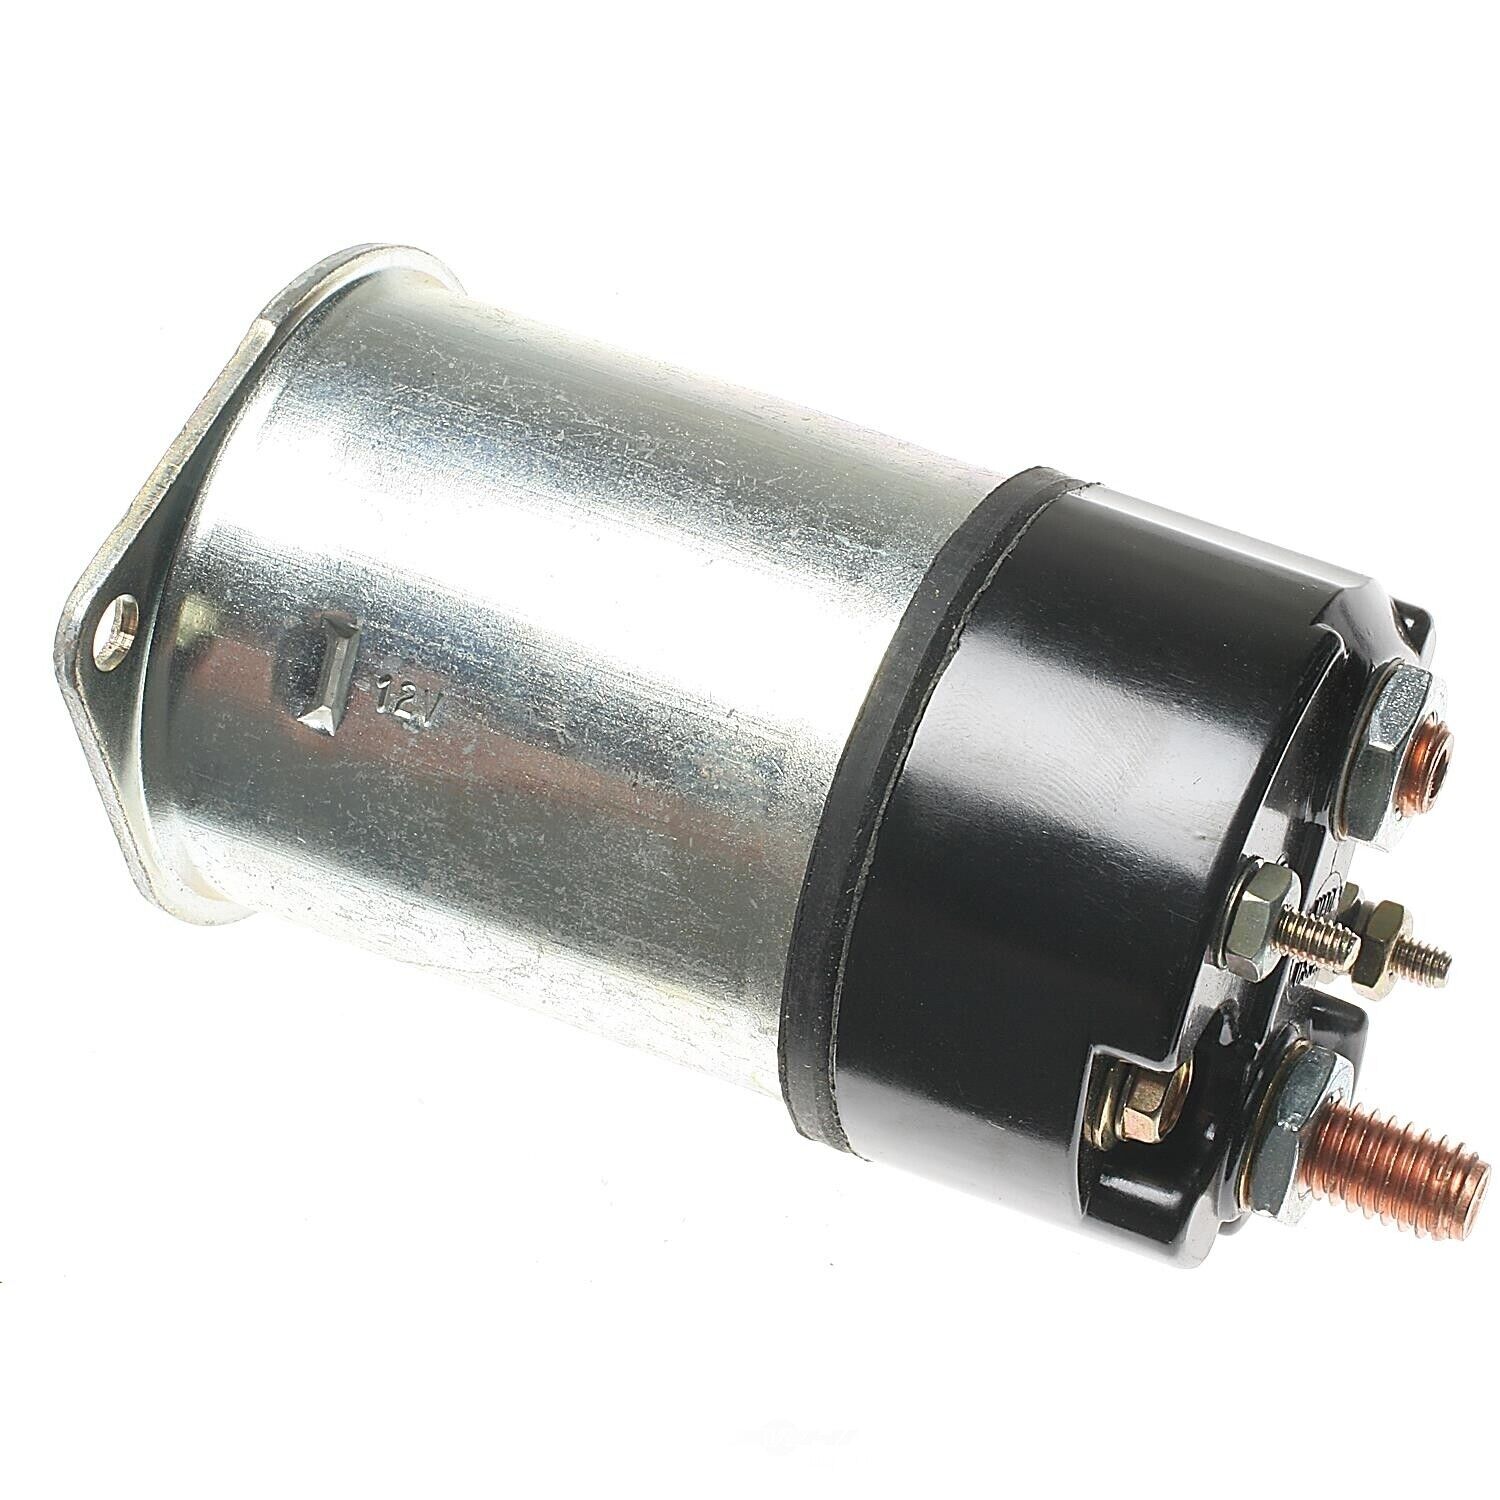 All items 2021 new in the store Starter Solenoid Standard SS-212